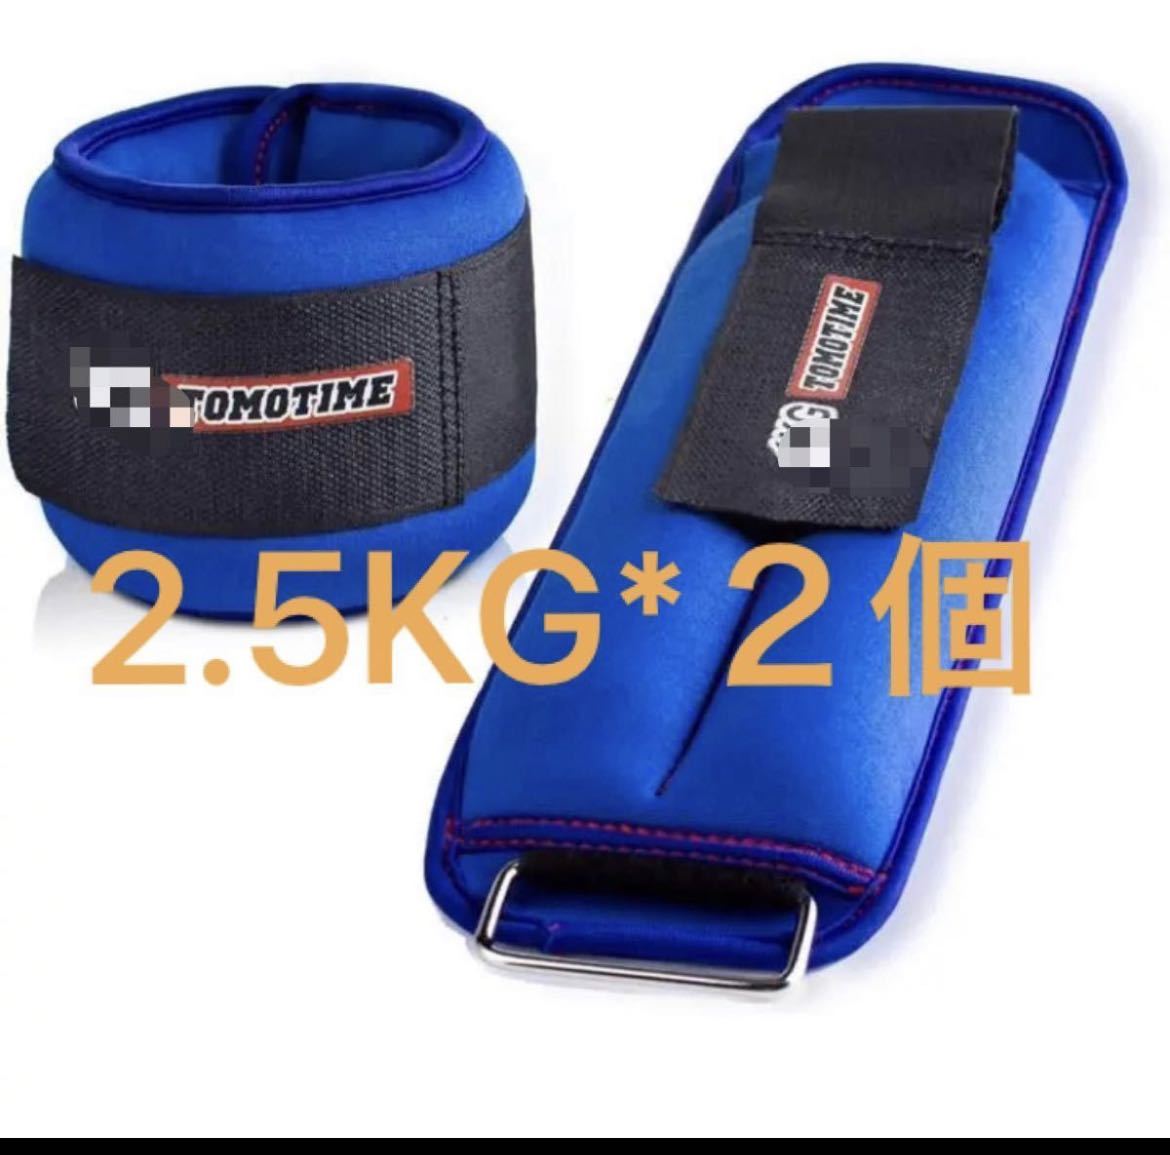  new goods ankle weight 2 piece X2.5KG hand pair both for training supplies blue body .to